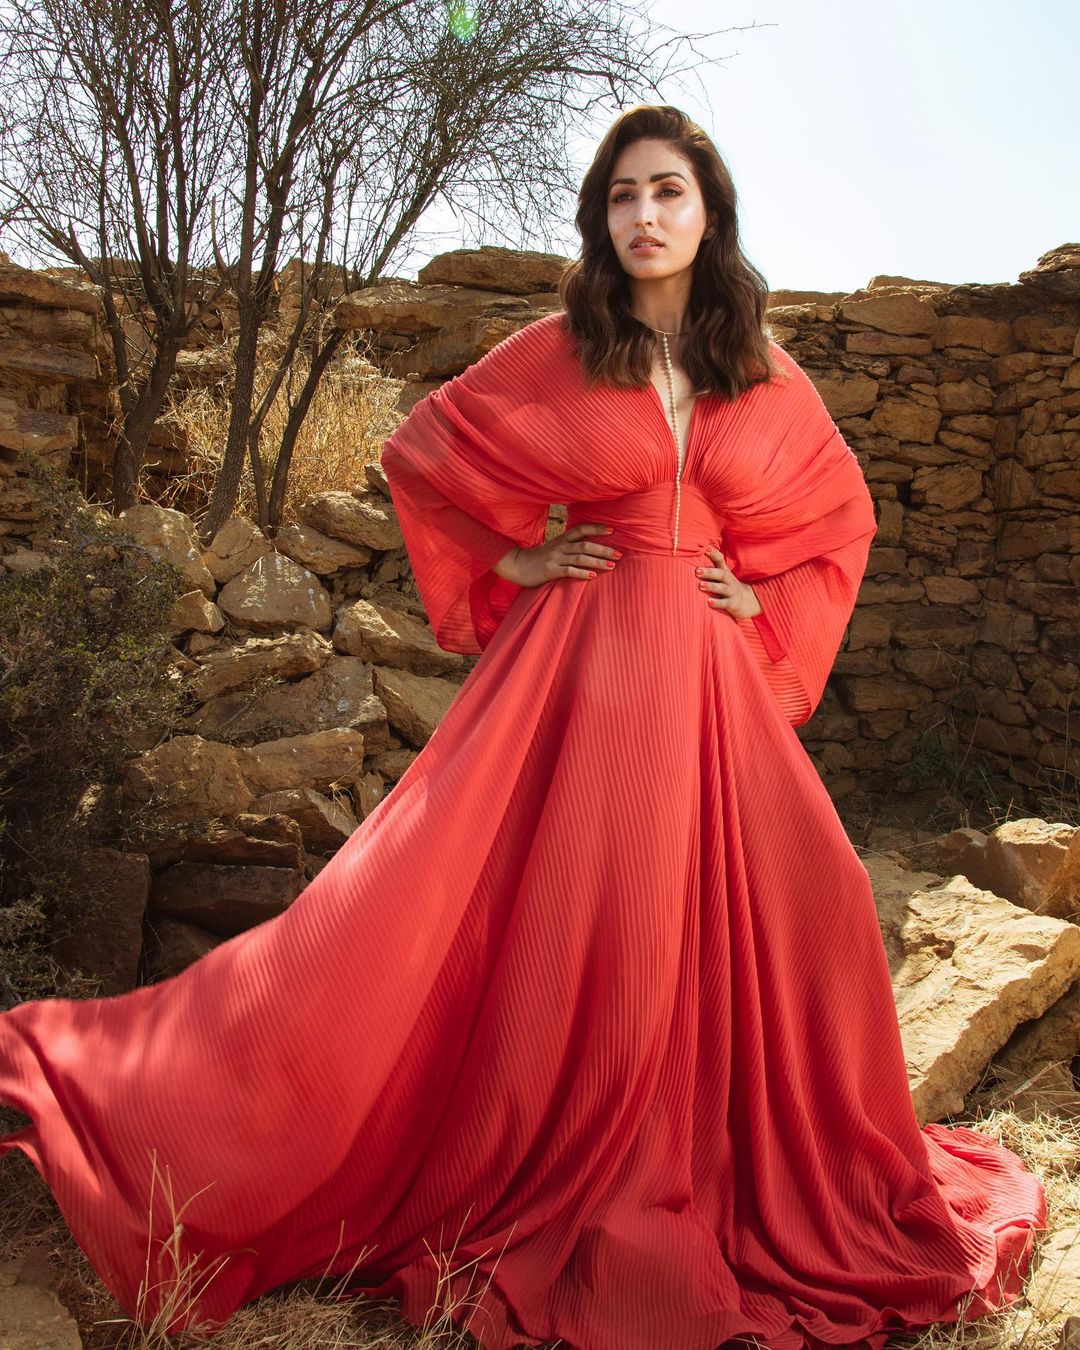 Yami Gautam cuts a striking figure in the red flowing gown.